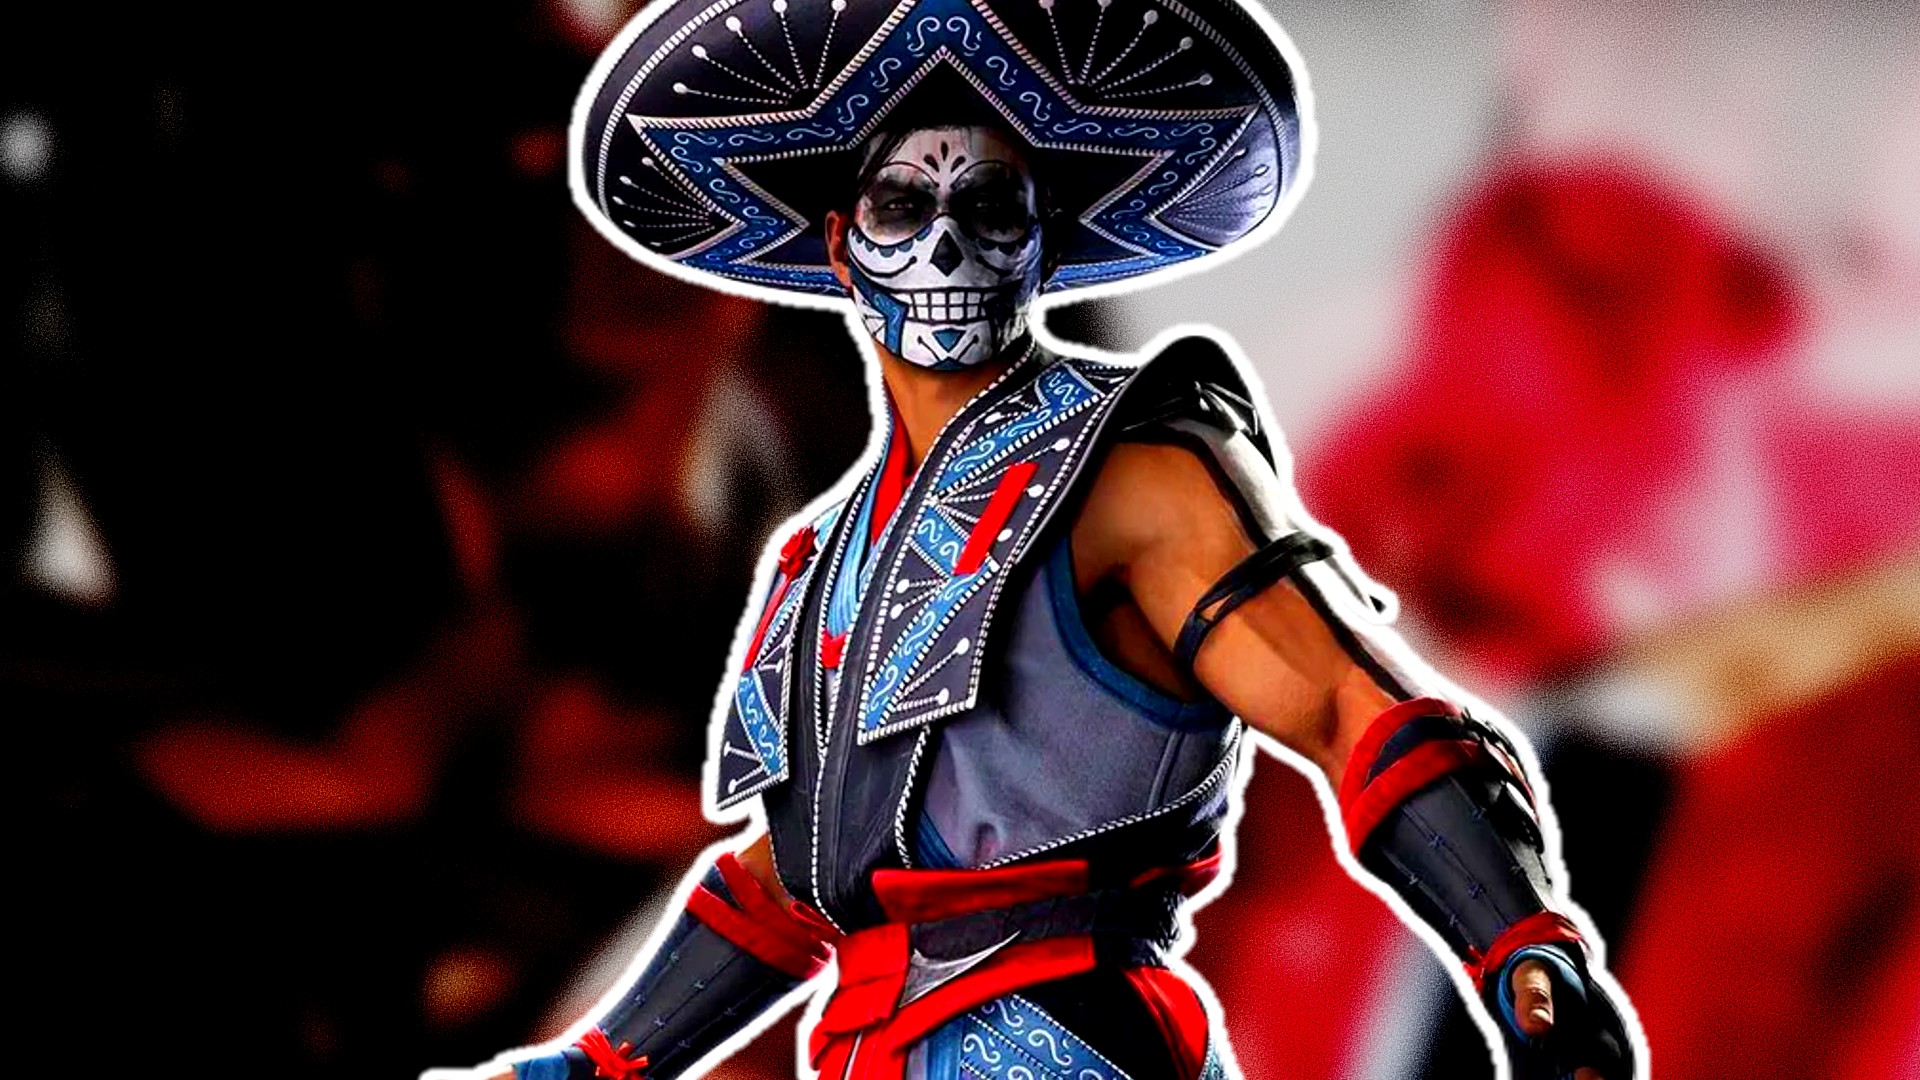 Check out the latest Mortal Kombat 1 Halloween skins leaks ahead of any official reveals